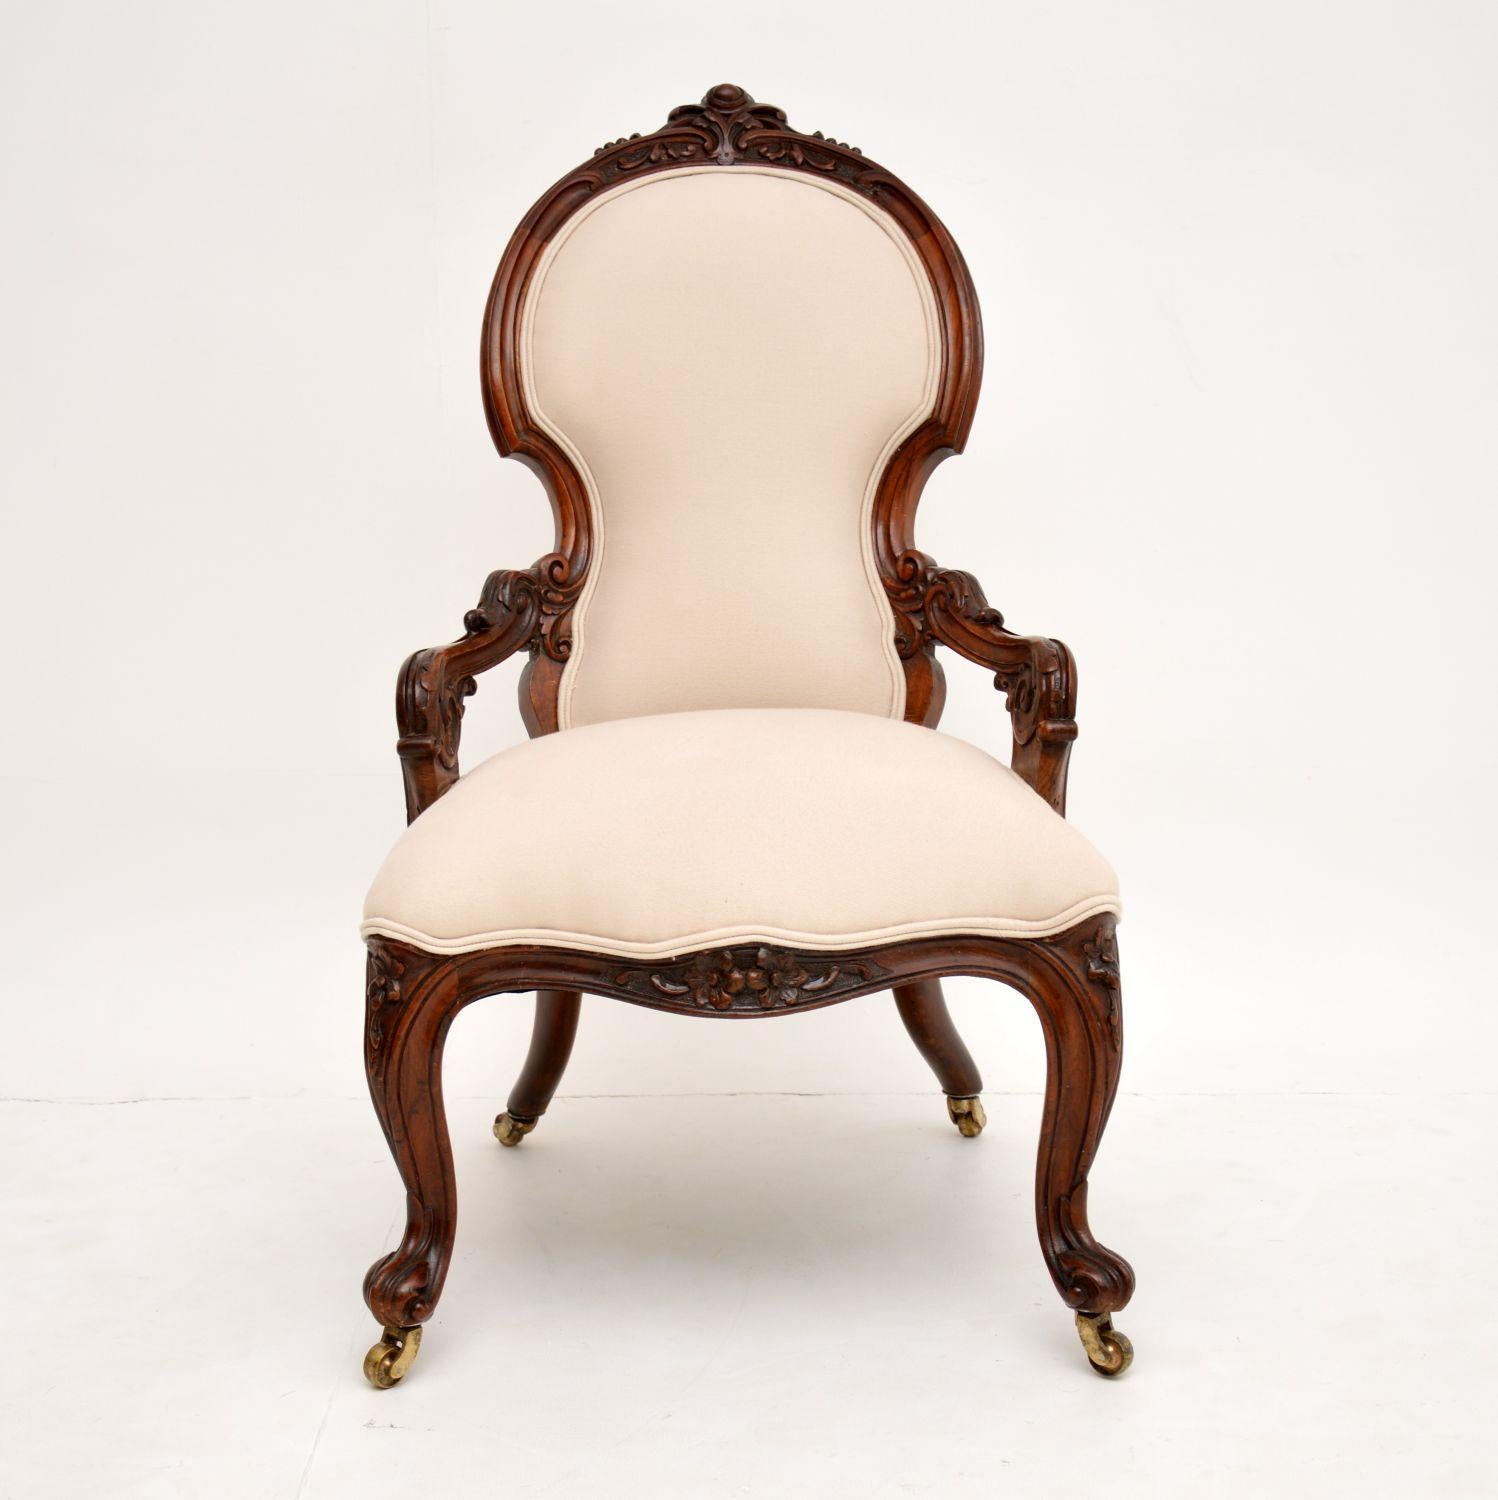 A beautifully shaped antique Victorian nursing chair in solid walnut, this dates from circa 1860-1880 period. This is of superb quality and has a gorgeous design.

The solid walnut frame has wonderful carving throughout, with a beautiful warm